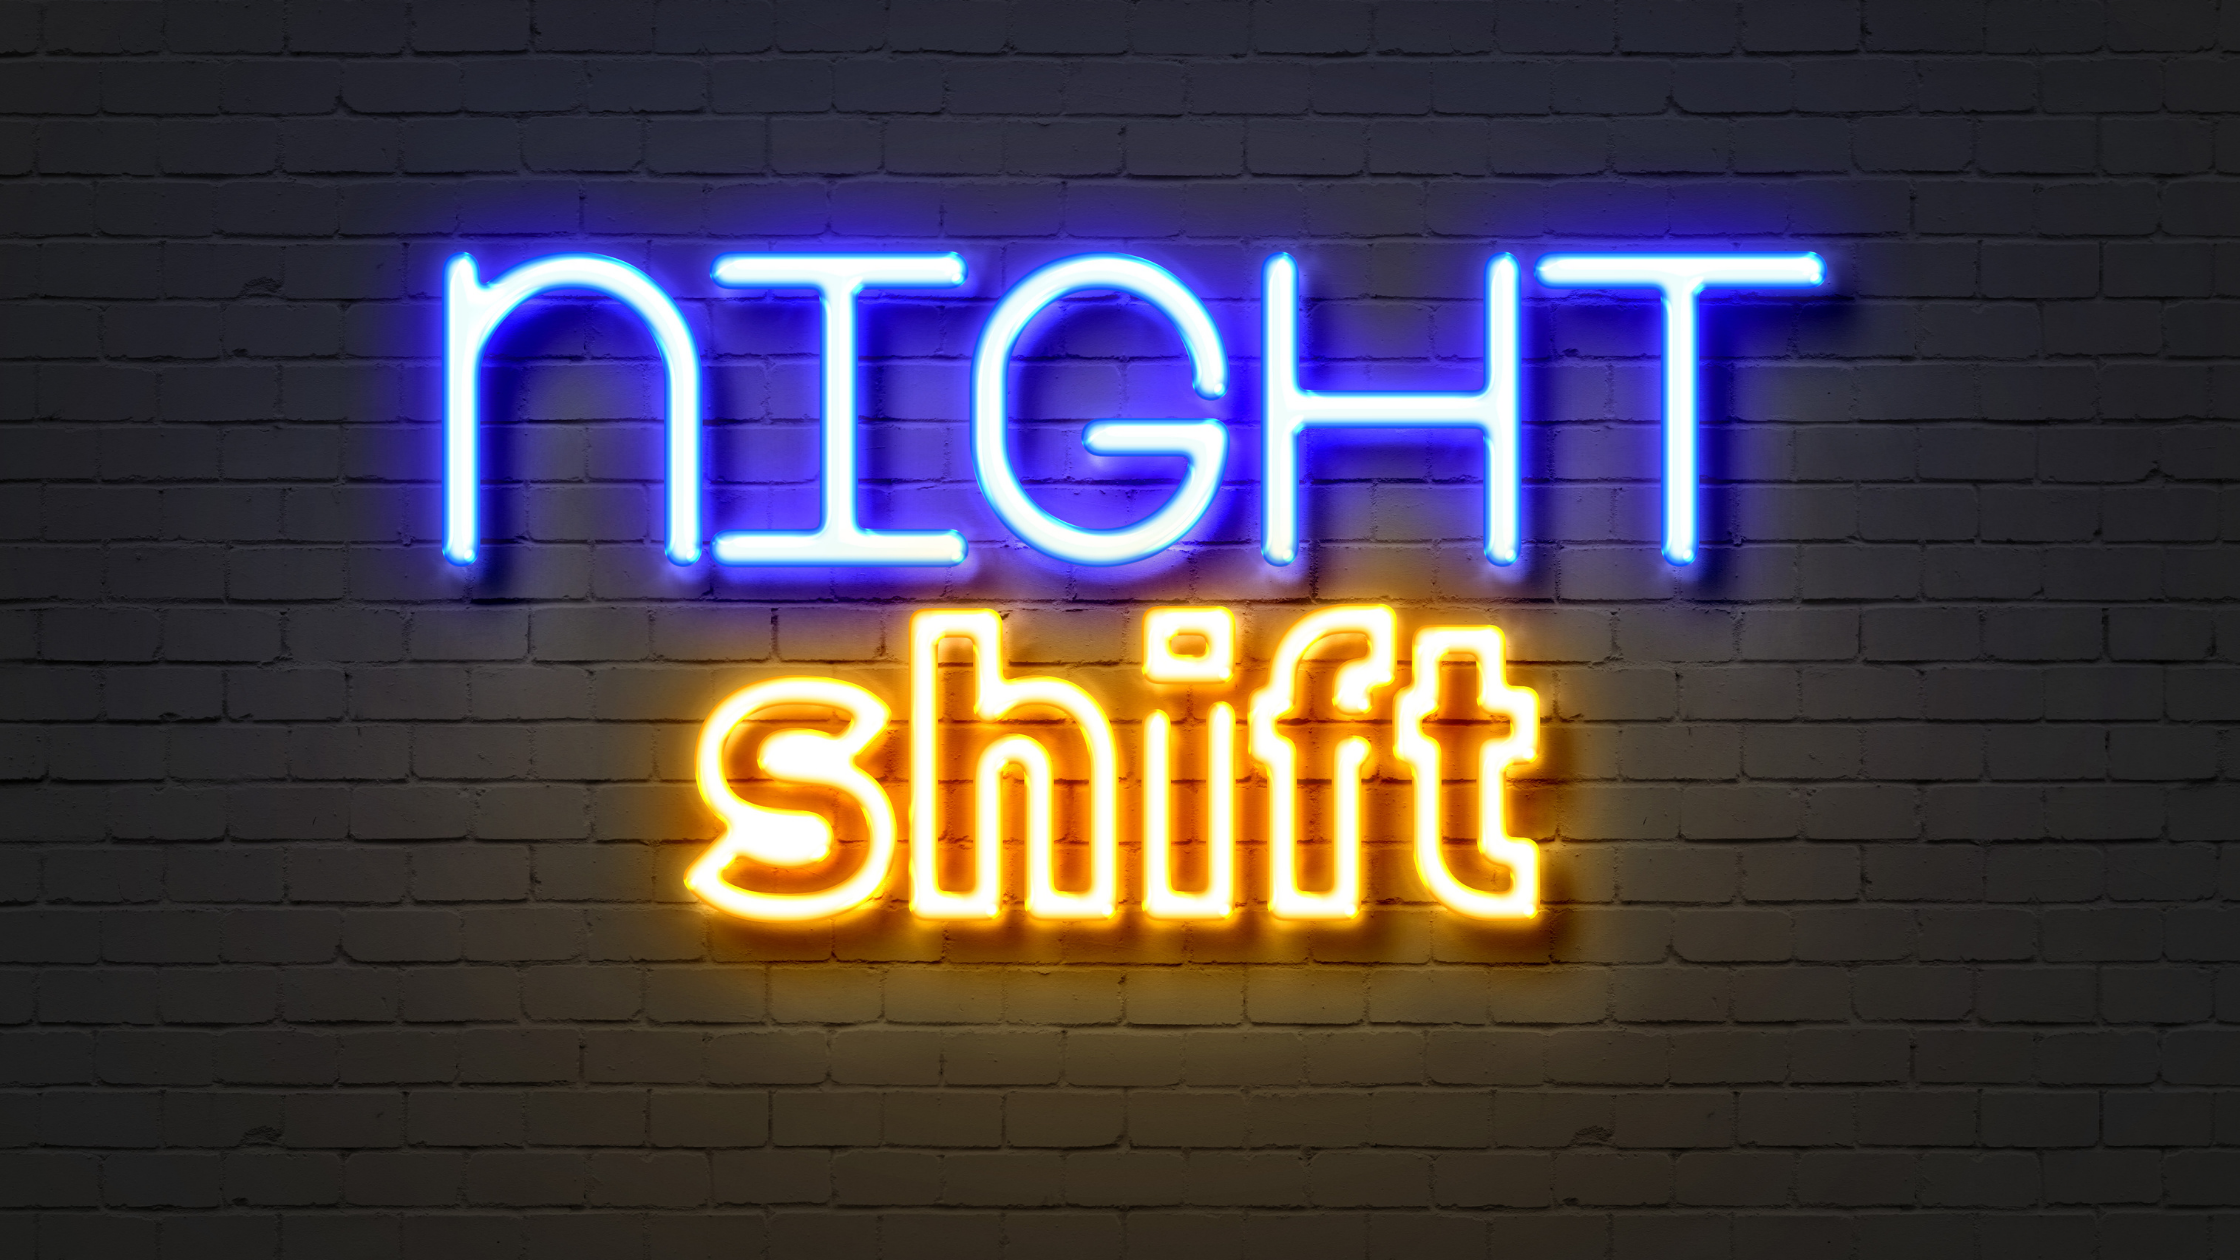 Night shift - Definition, Meaning & Synonyms